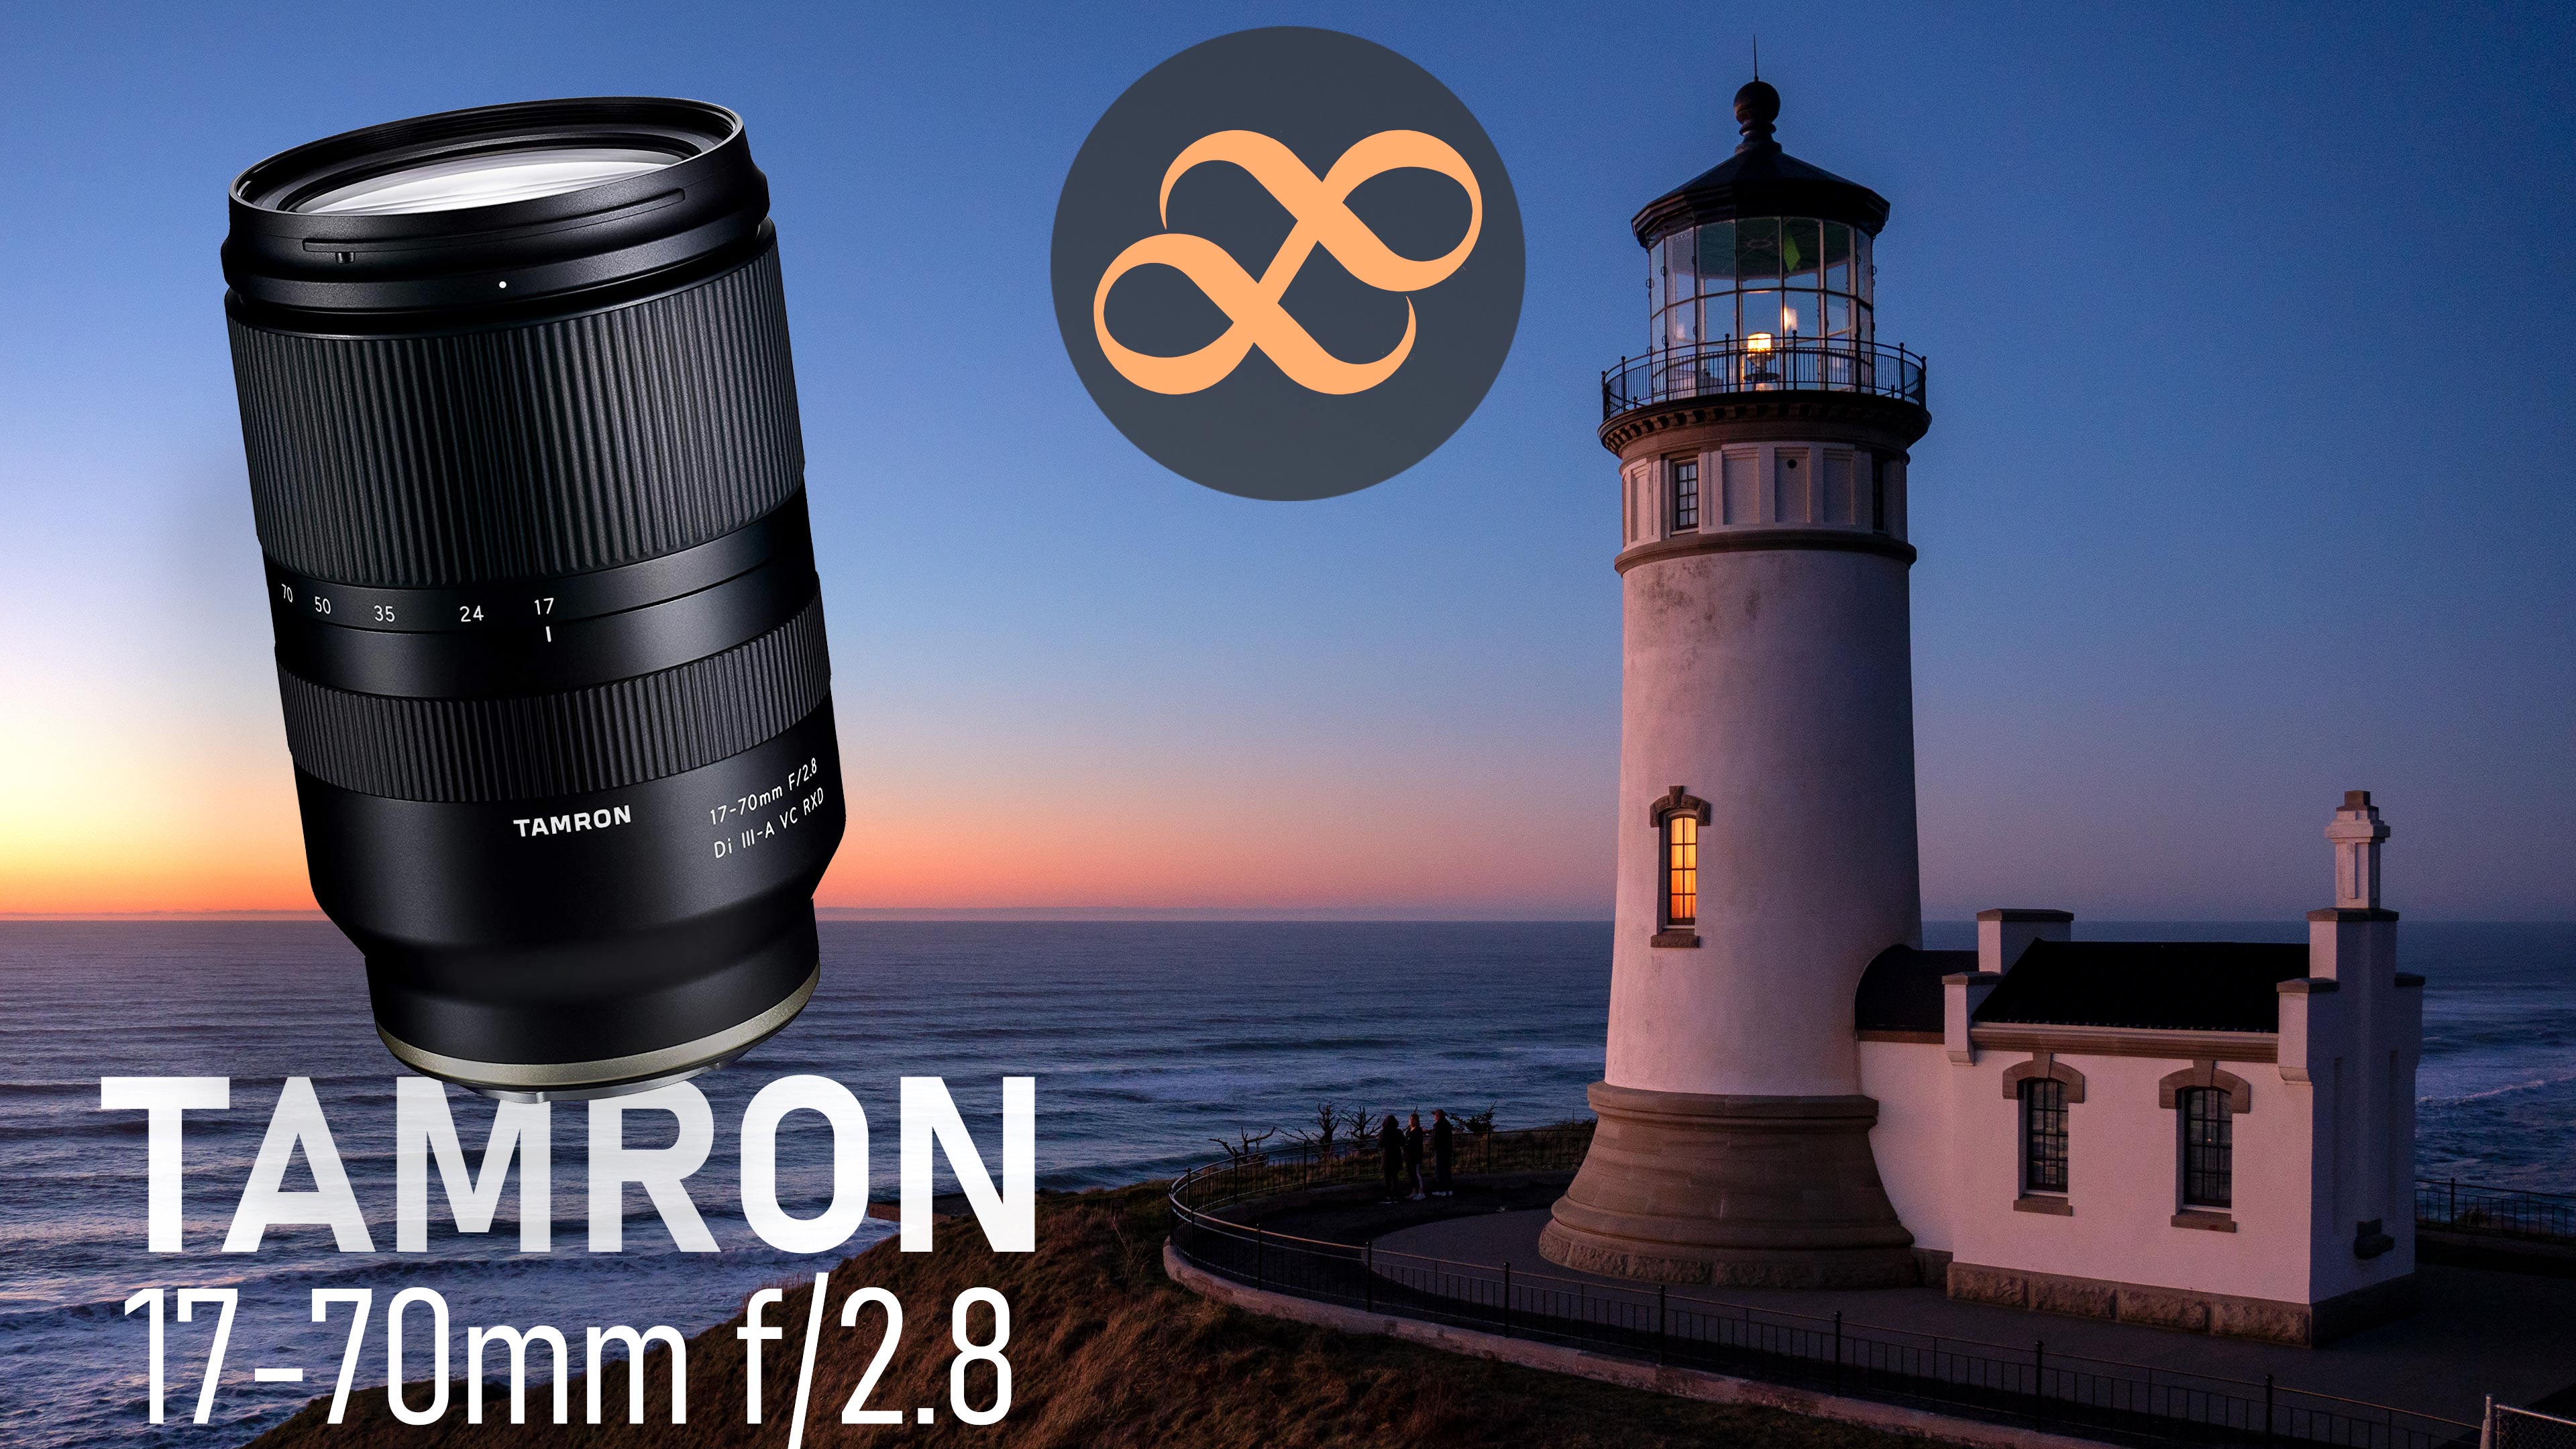 Tamron 17-70mm f/2.8 for Sony Review: A Versatile Lens for a Great